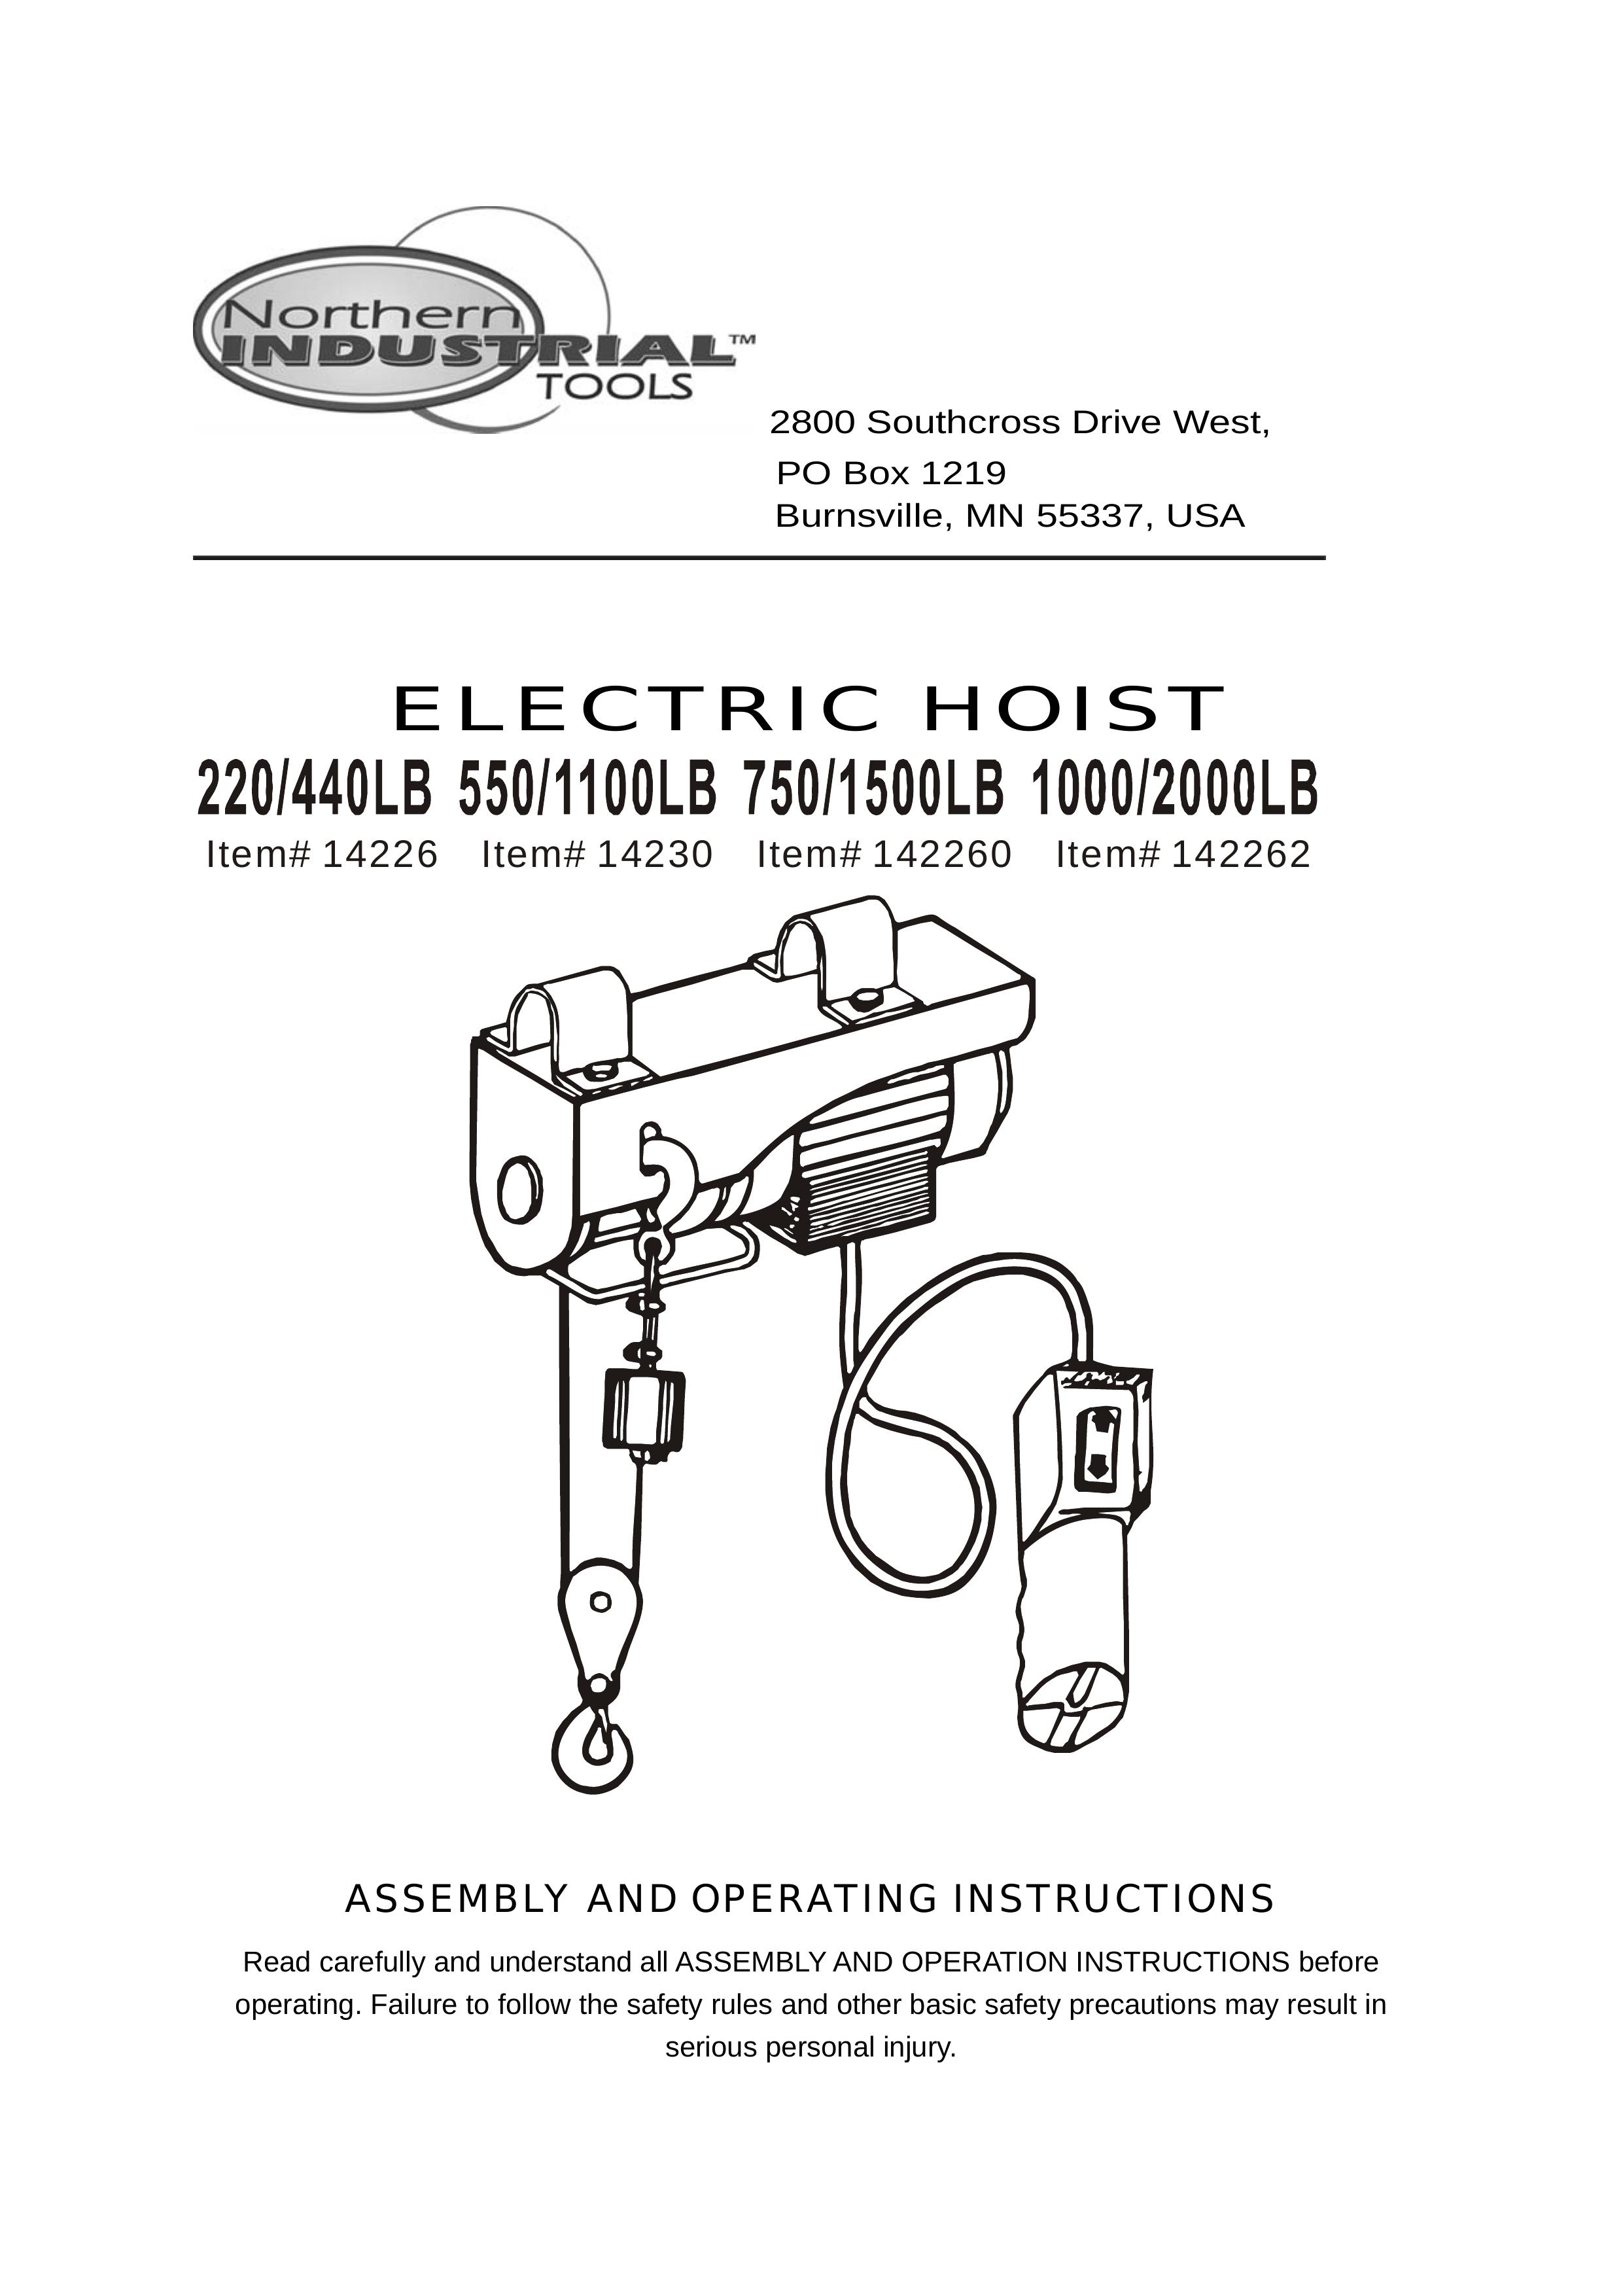 Northern Industrial Tools 142262 Personal Lift User Manual